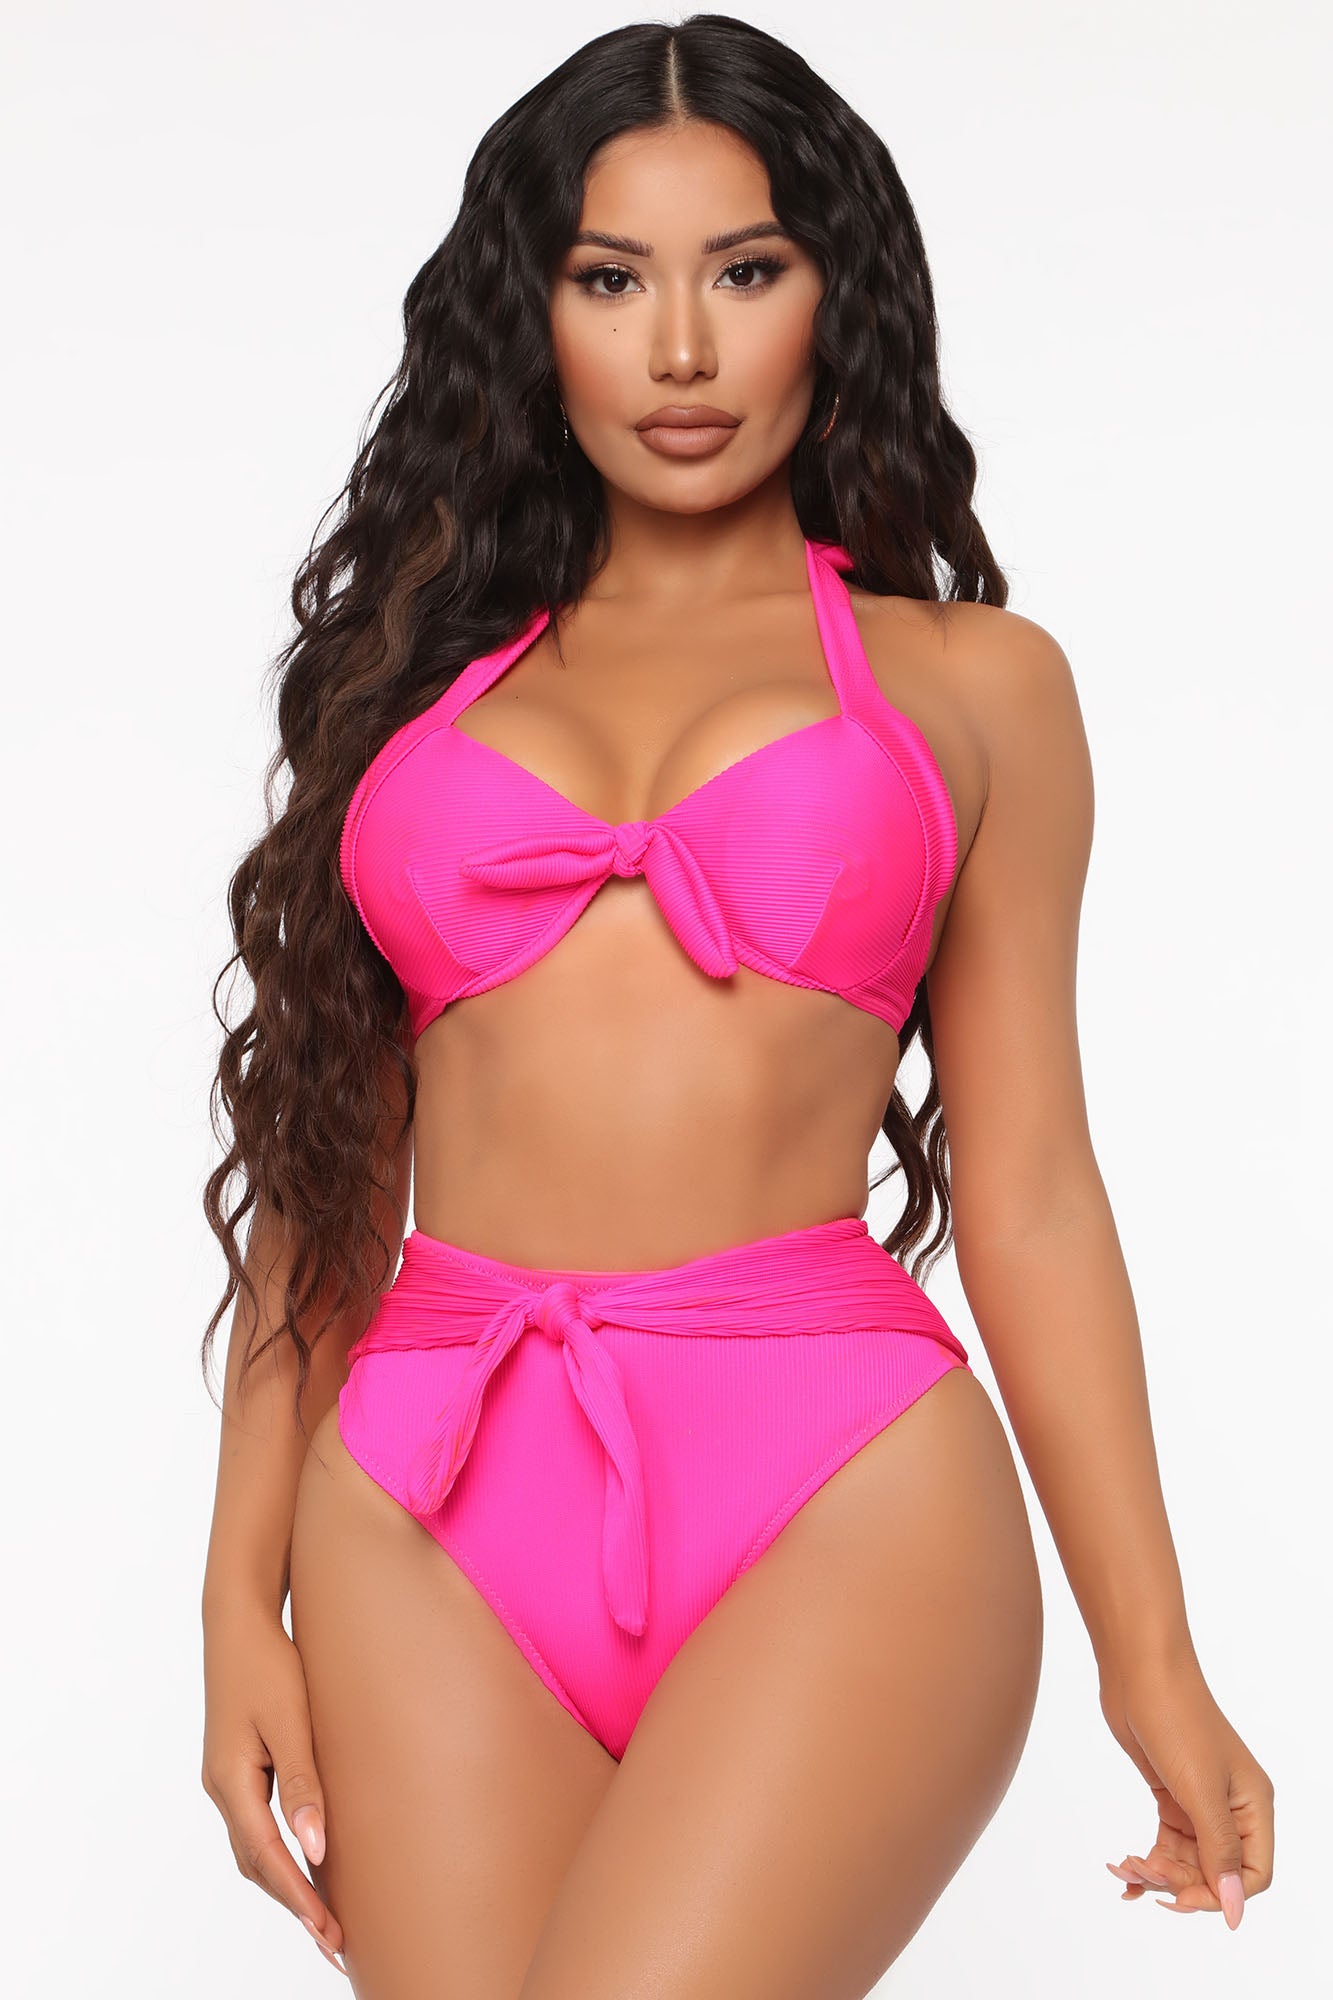 Endless Summer Neon Retro Color Block Push Up Top in Hot Pink Blue